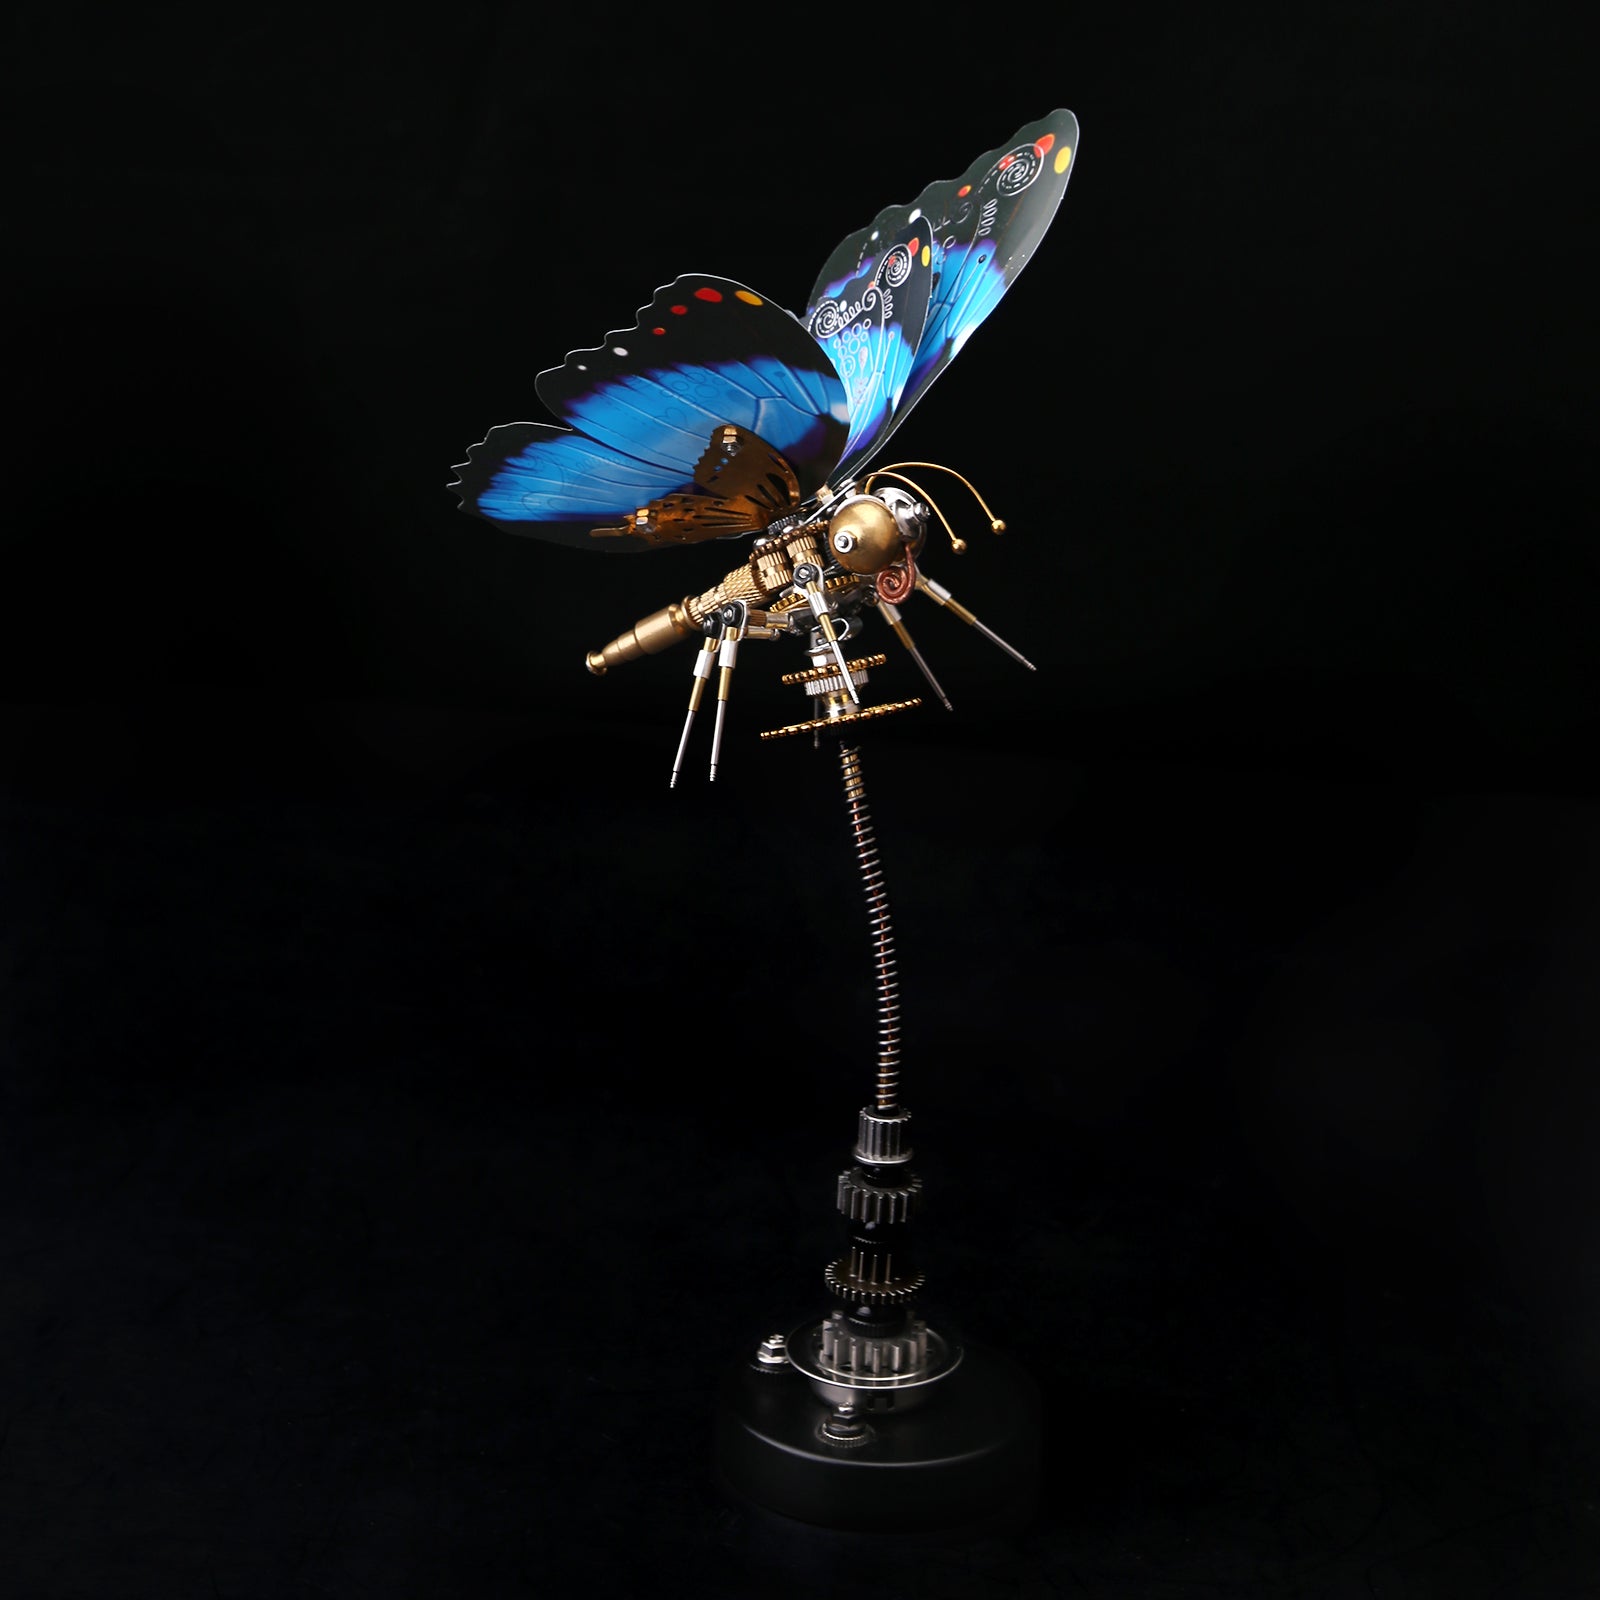 Steampunk Blue Butterfly Pipevine Swallowtail Model Building Kit With Flower Base